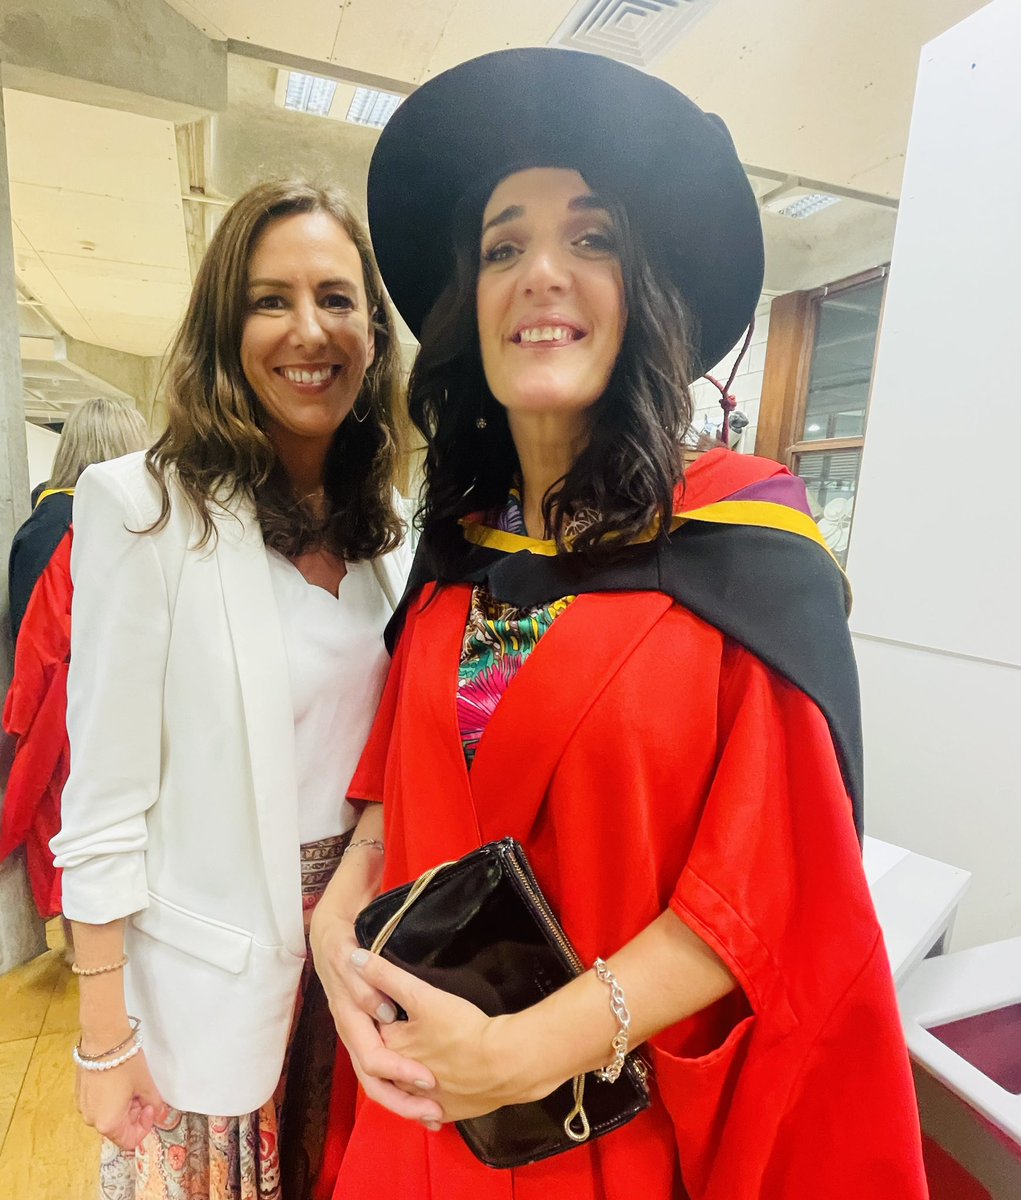 Very proud of the new Dr Hayes! - @Hayes_Cait #ULgraduations #StudyAtUL